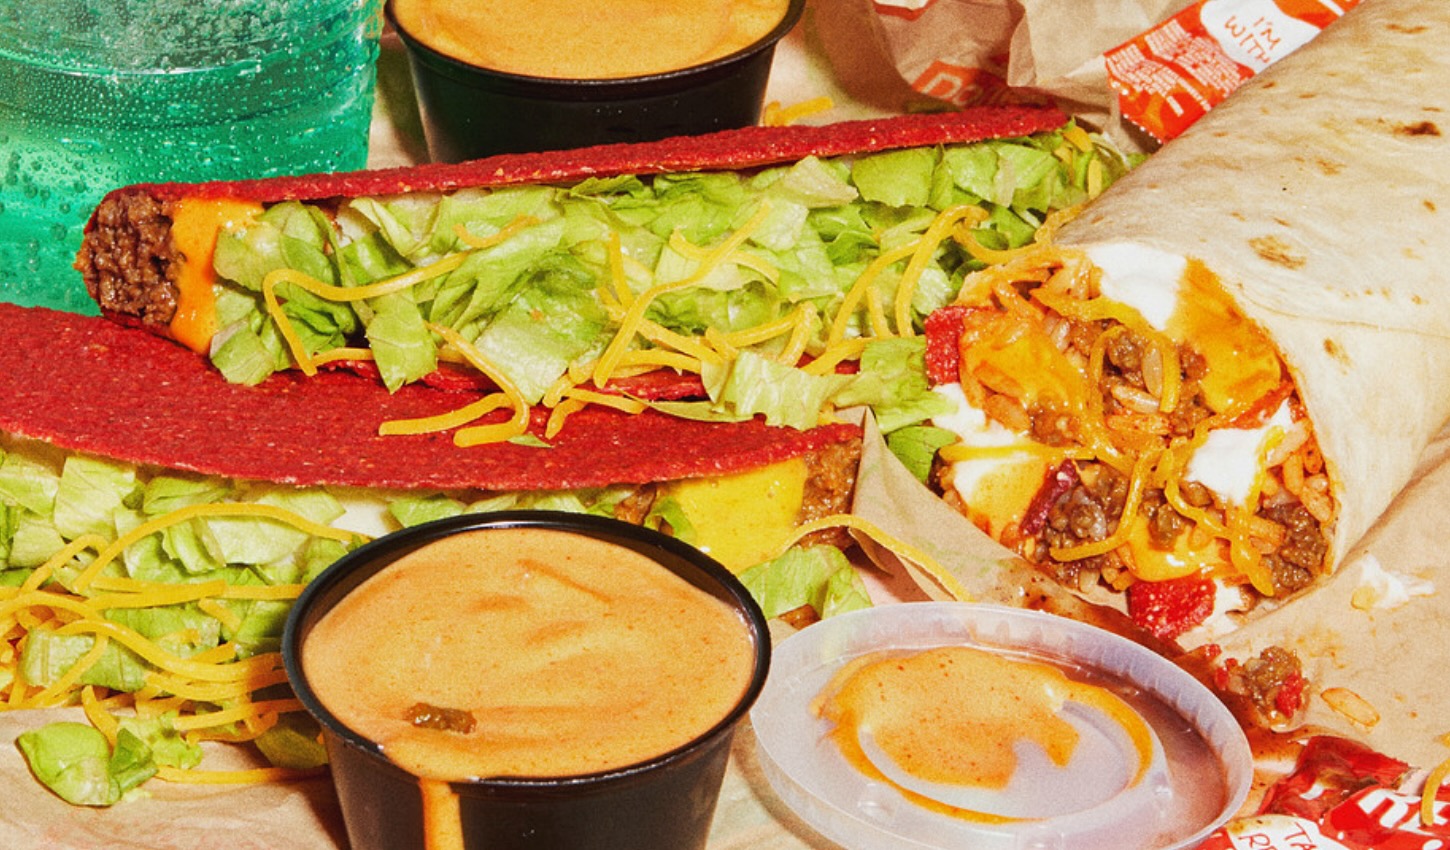 Taco Bell bringing back its fiery Volcano Menu after decadelong absence